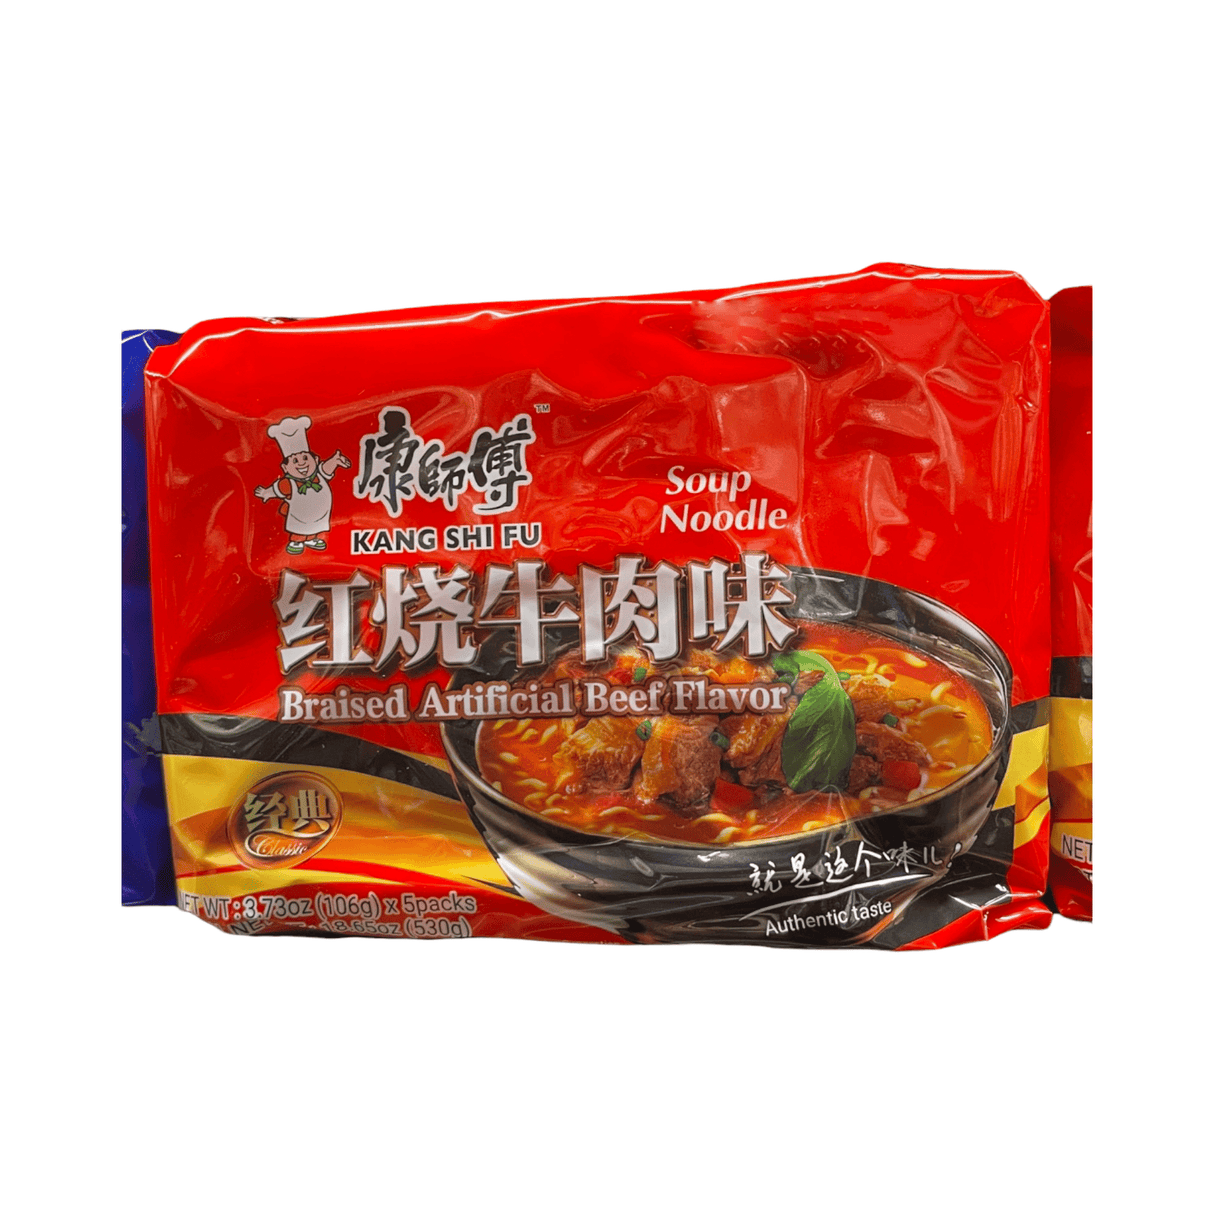 Kang Shi Fu Soup Noodle Braised Artificial Beef Flavor